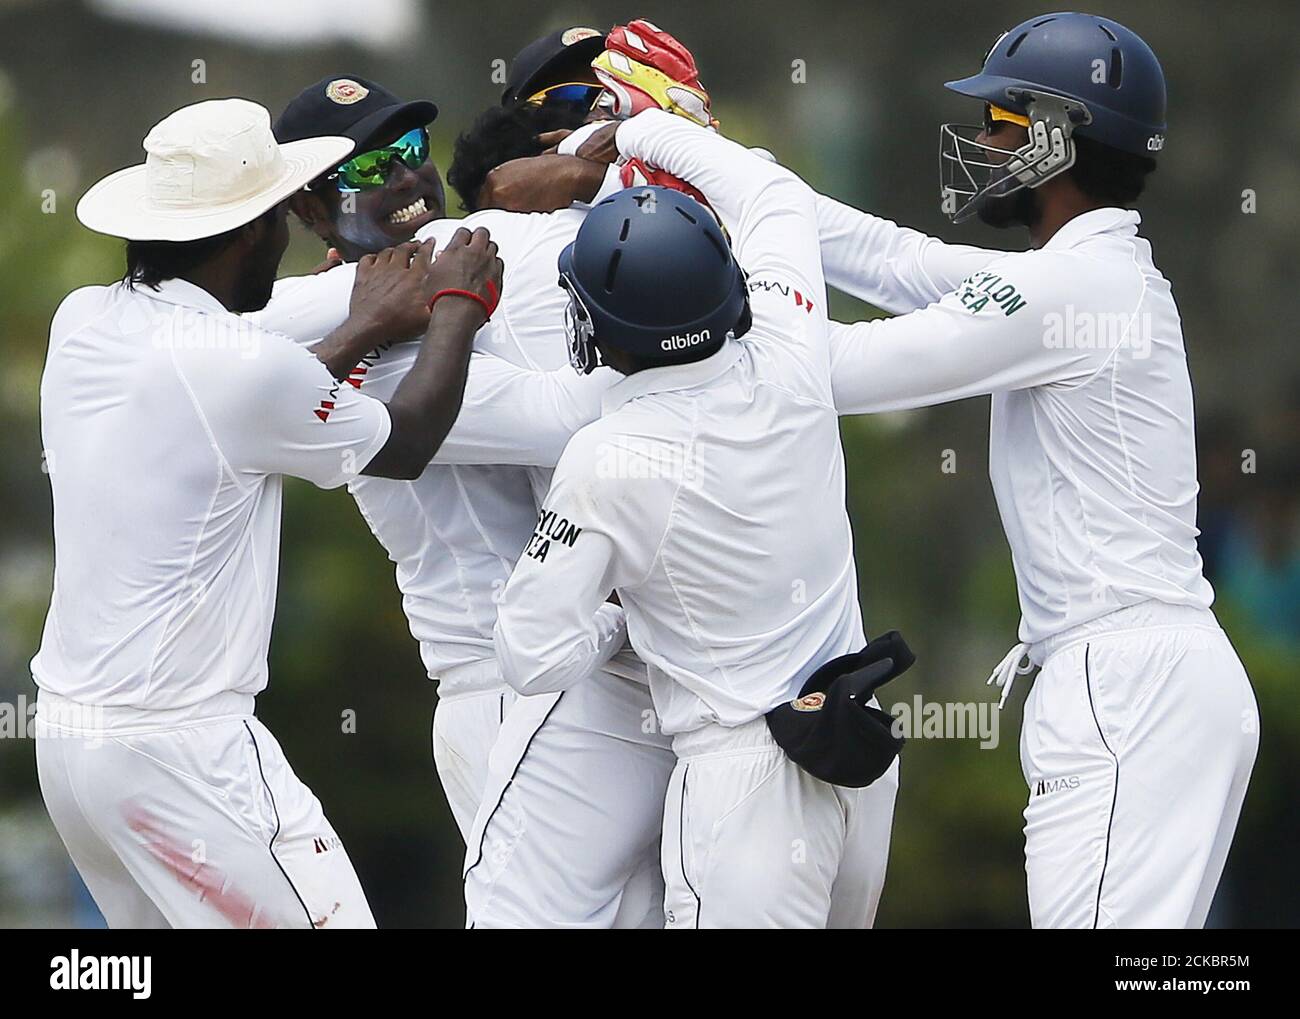 Sri Lanka's Tharindu Kaushal (C) celebrates with captain Angelo Mathews (2nd L) and Dinesh Chandimal (R) after taking the wicket of India's Shikhar Dhawani (not pictured) during the fourth day of their first test cricket match against Sri Lanka in Galle August 15, 2015. REUTERS/Dinuka Liyanawatte Stock Photo